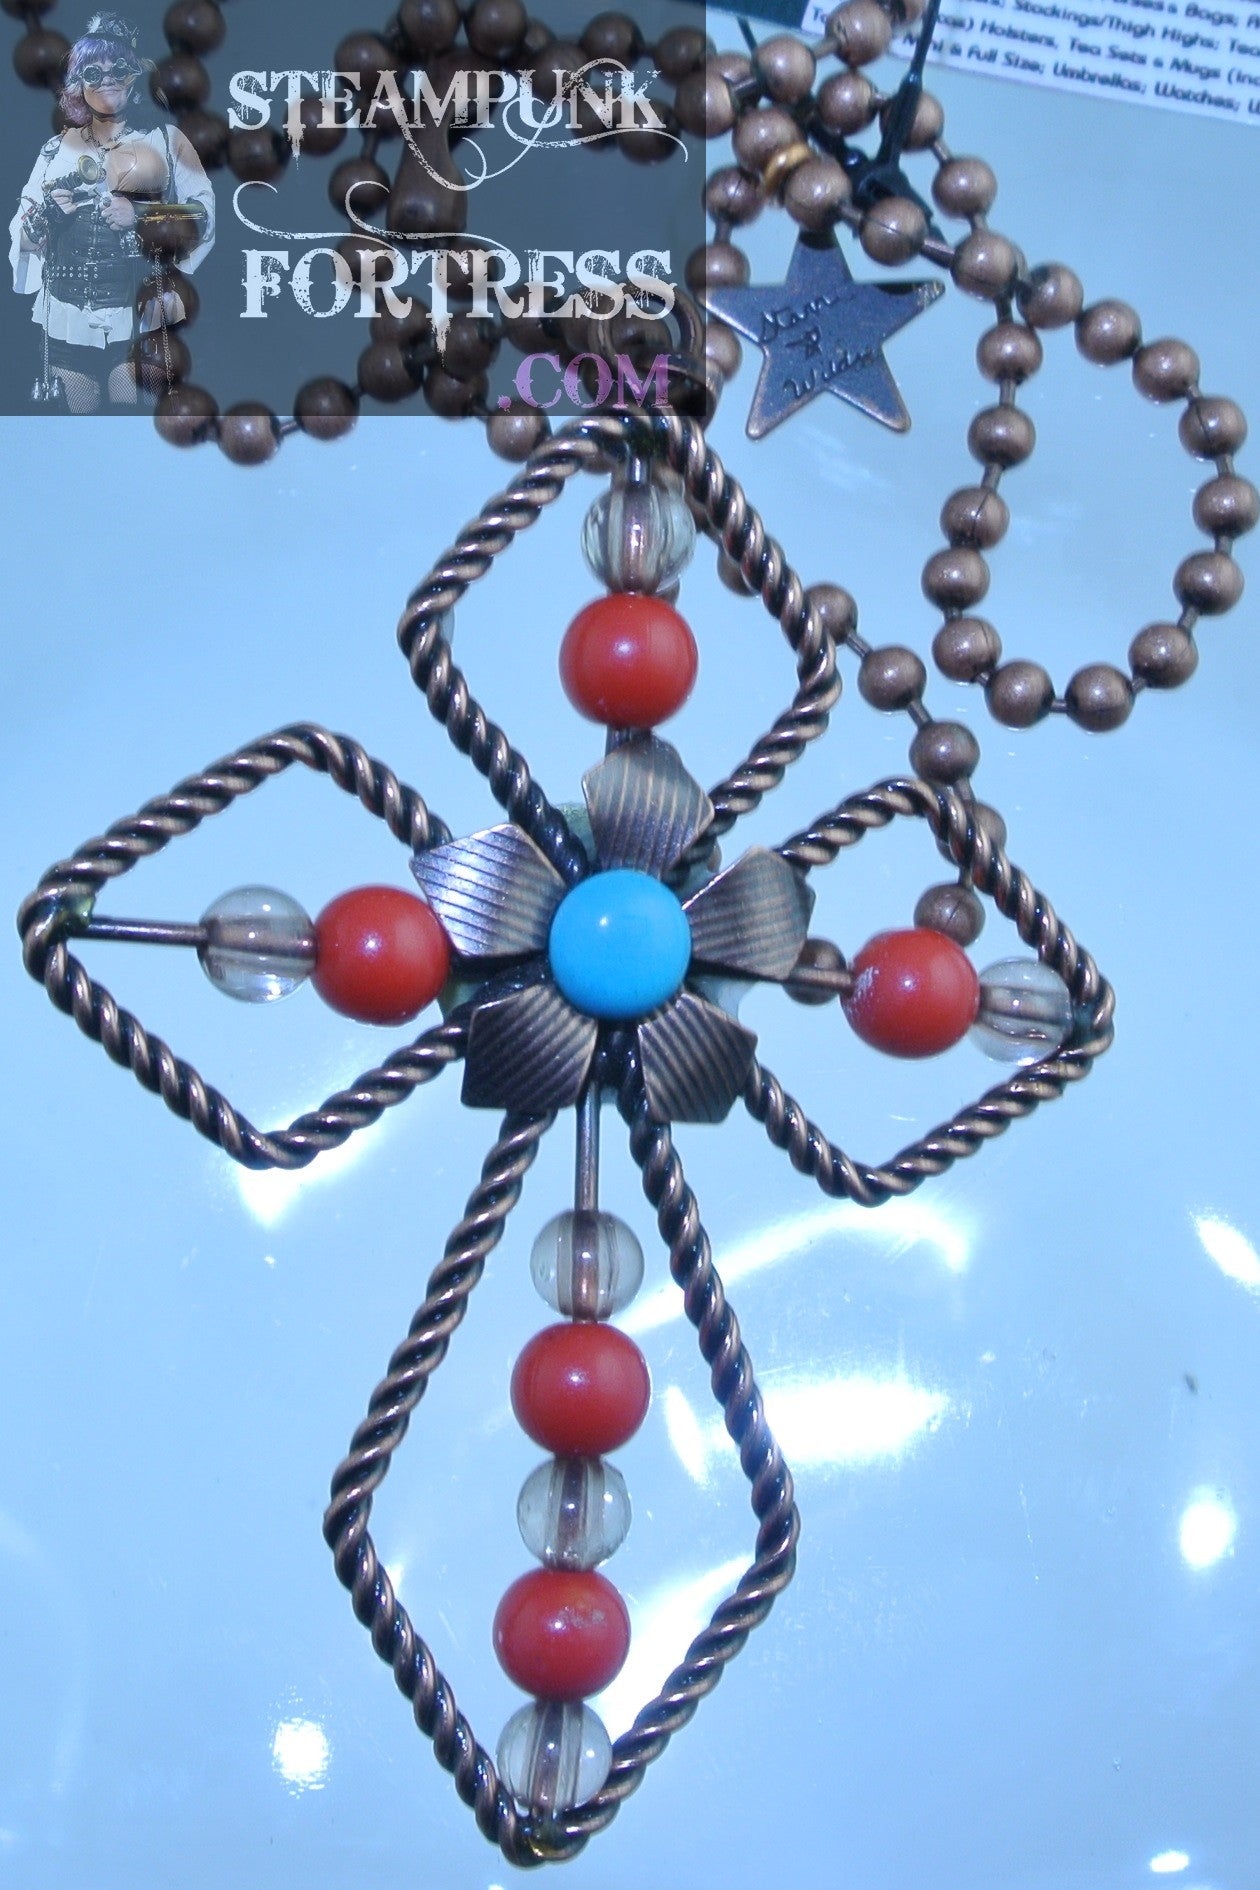 PIN BROOCH COPPER CROSS TWISTED FLOWER CENTER RED BEADS NECKLACE VERSATILE MULTI USE STARR WILDE STEAMPUNK FORTRESS